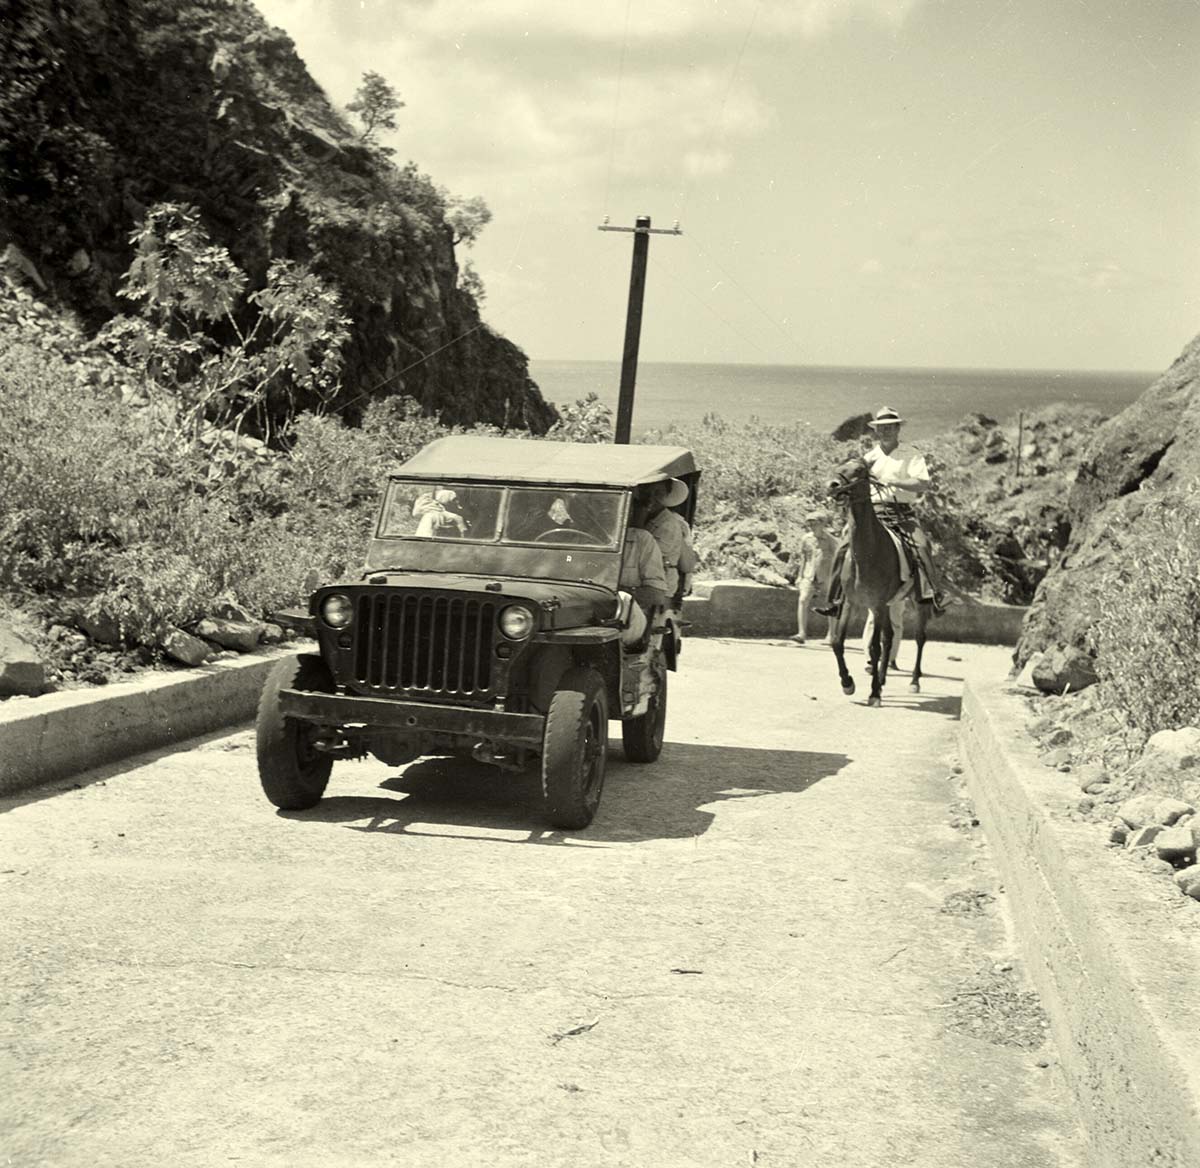 The Bottom. On the road in a jeep, 1947